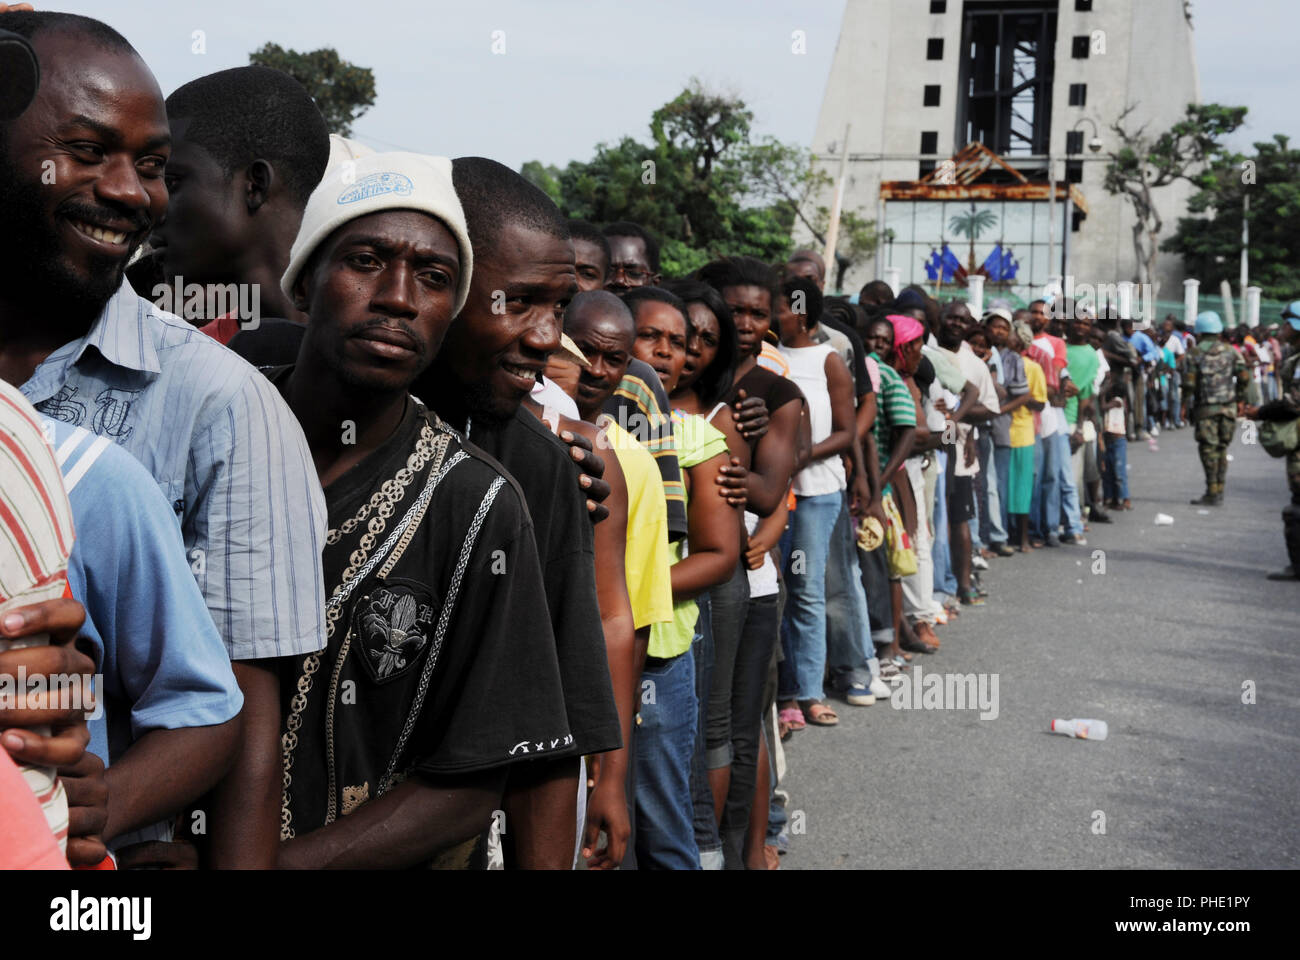 Haitians line up for bags of rice in front the Presidential Palace in Port au Prince, Haiti on Jan. 25, 2010. Haiti was devastated by a 7.0 magnitude earthquake on Jan.12, 2010.  (U.S. Air Force photo by Tech. Sgt. Prentice Colter) (Released) Stock Photo